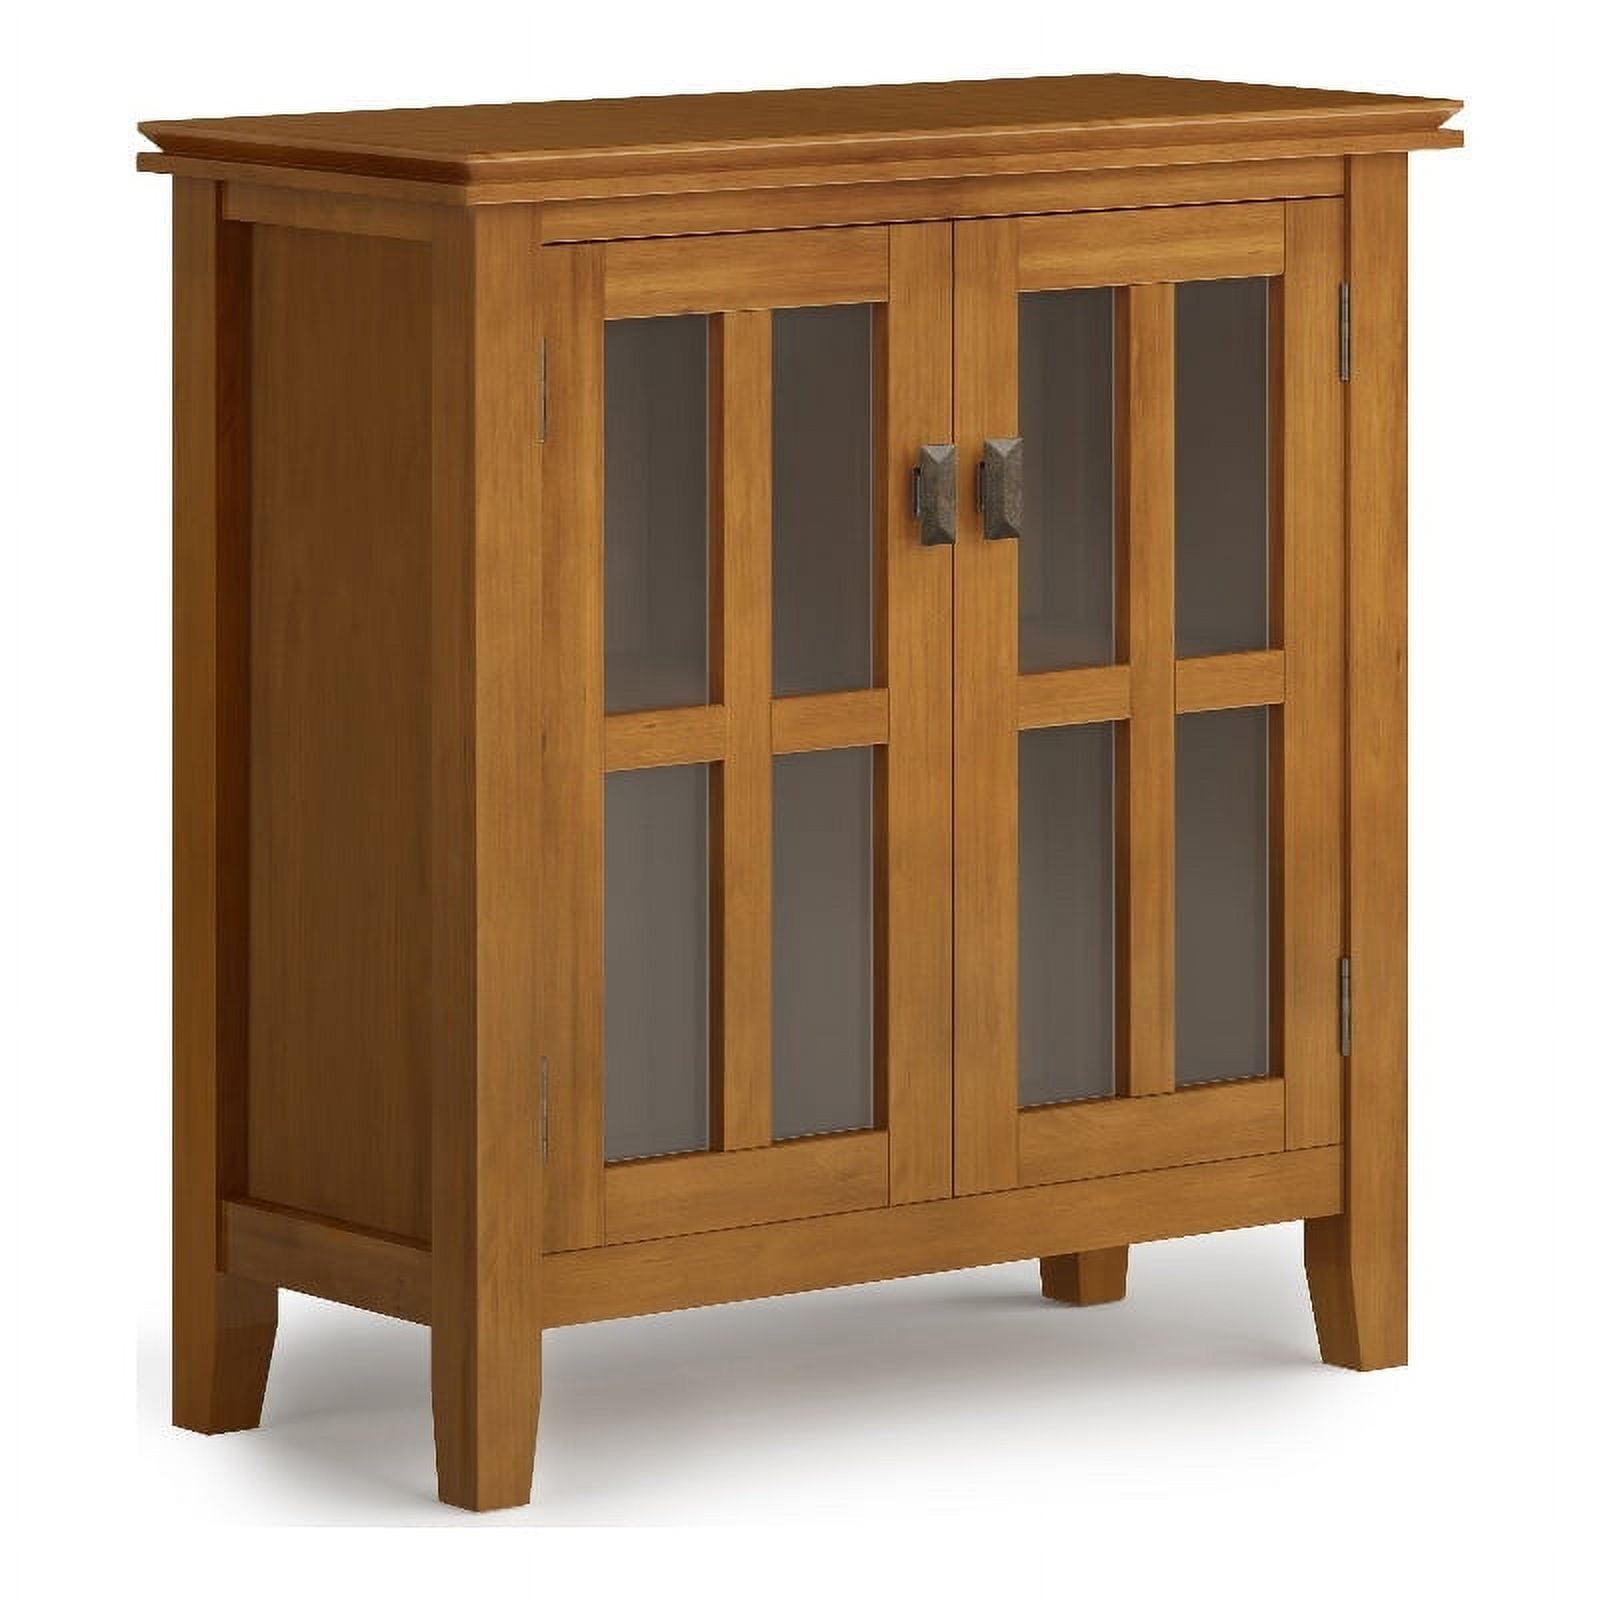 Traditional Honey Brown Solid Wood Low Storage Cabinet with Glass Doors